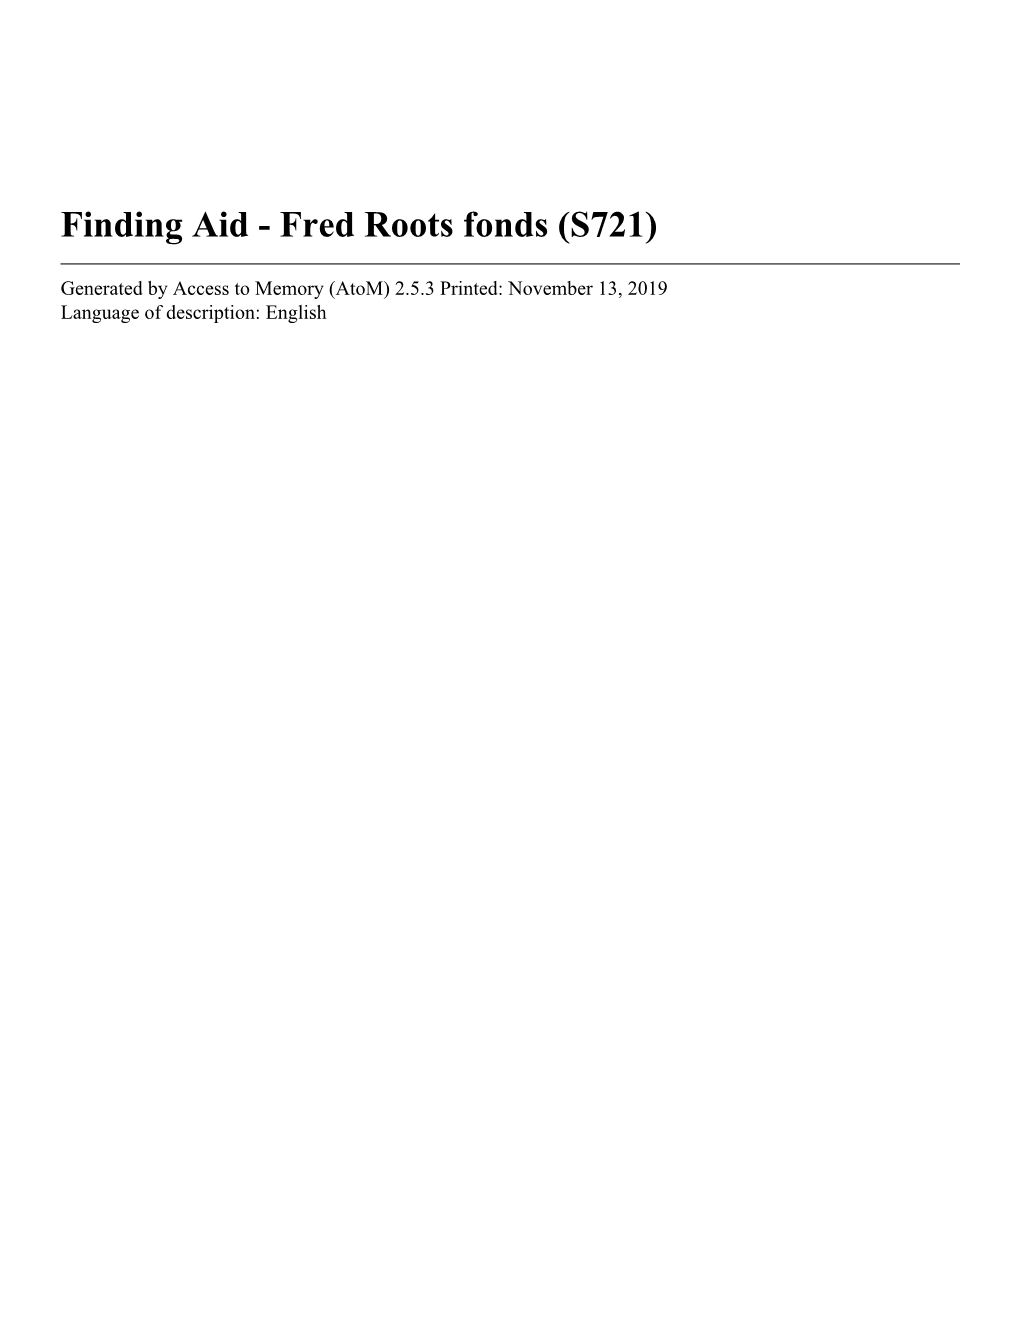 Finding Aid - Fred Roots Fonds (S721)